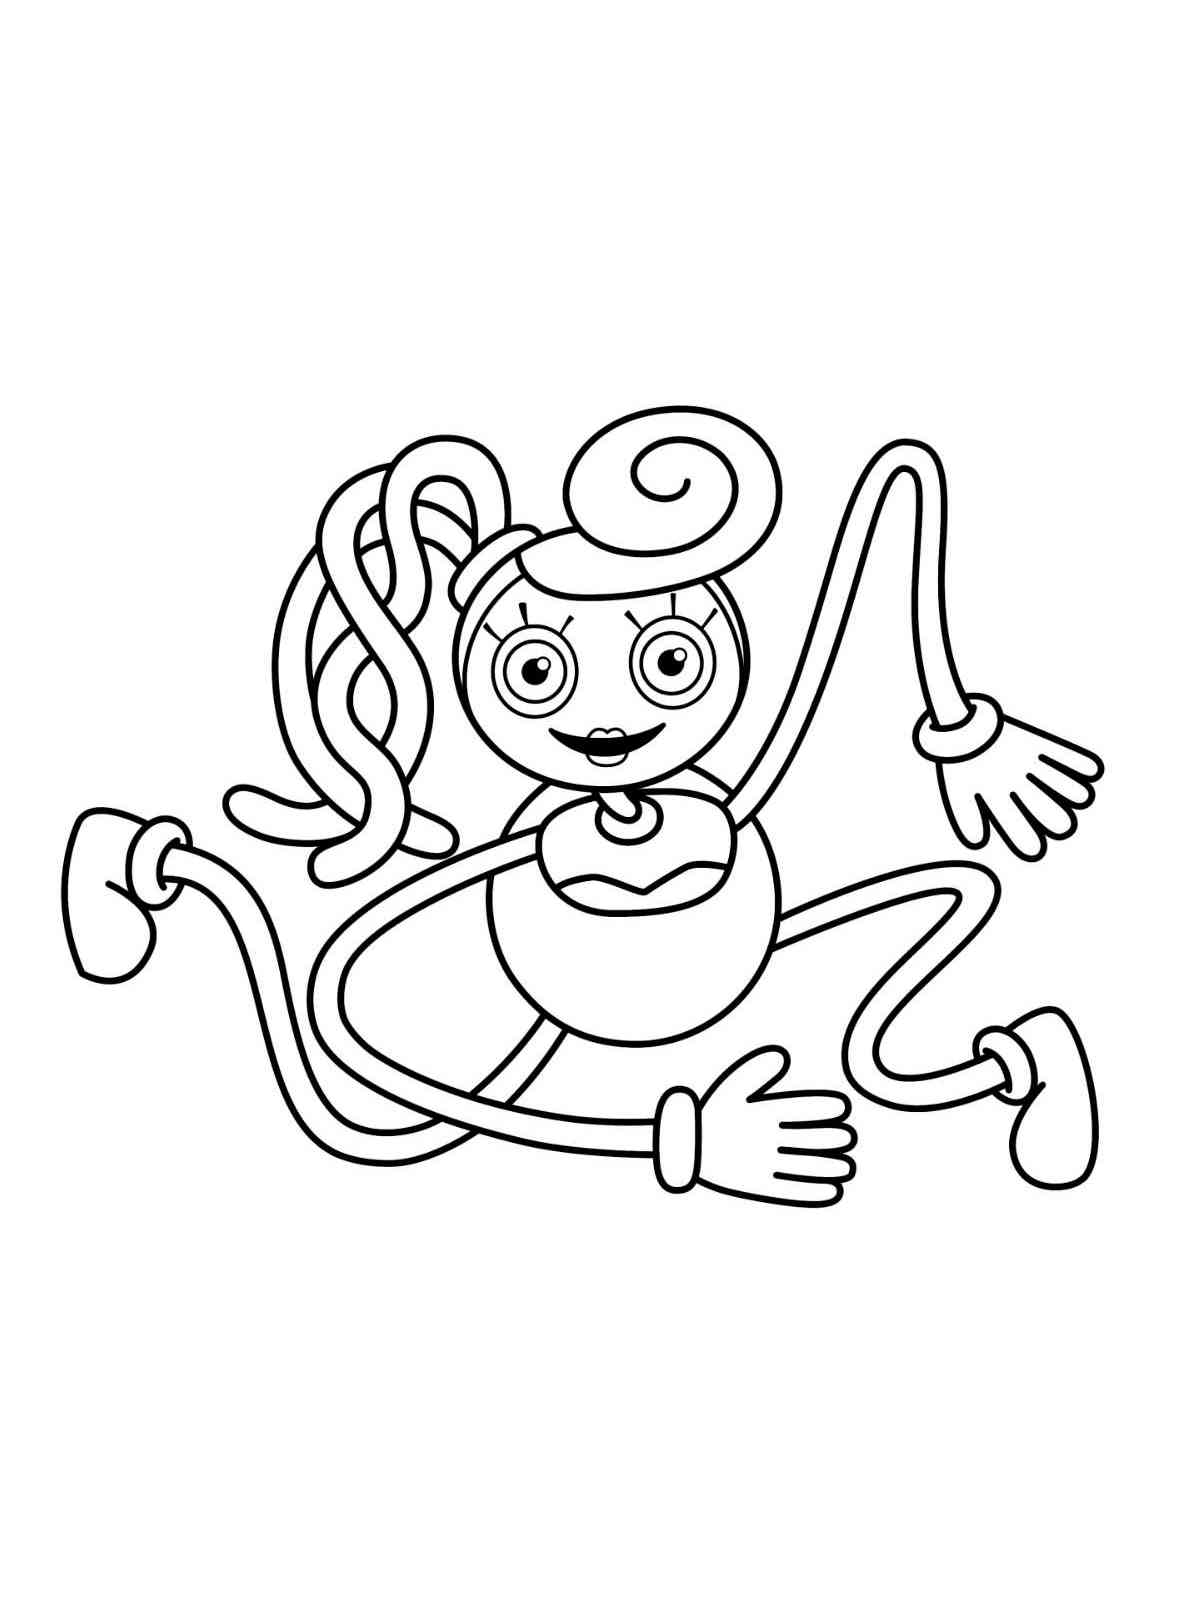 Funny Mommy Long Legs coloring page